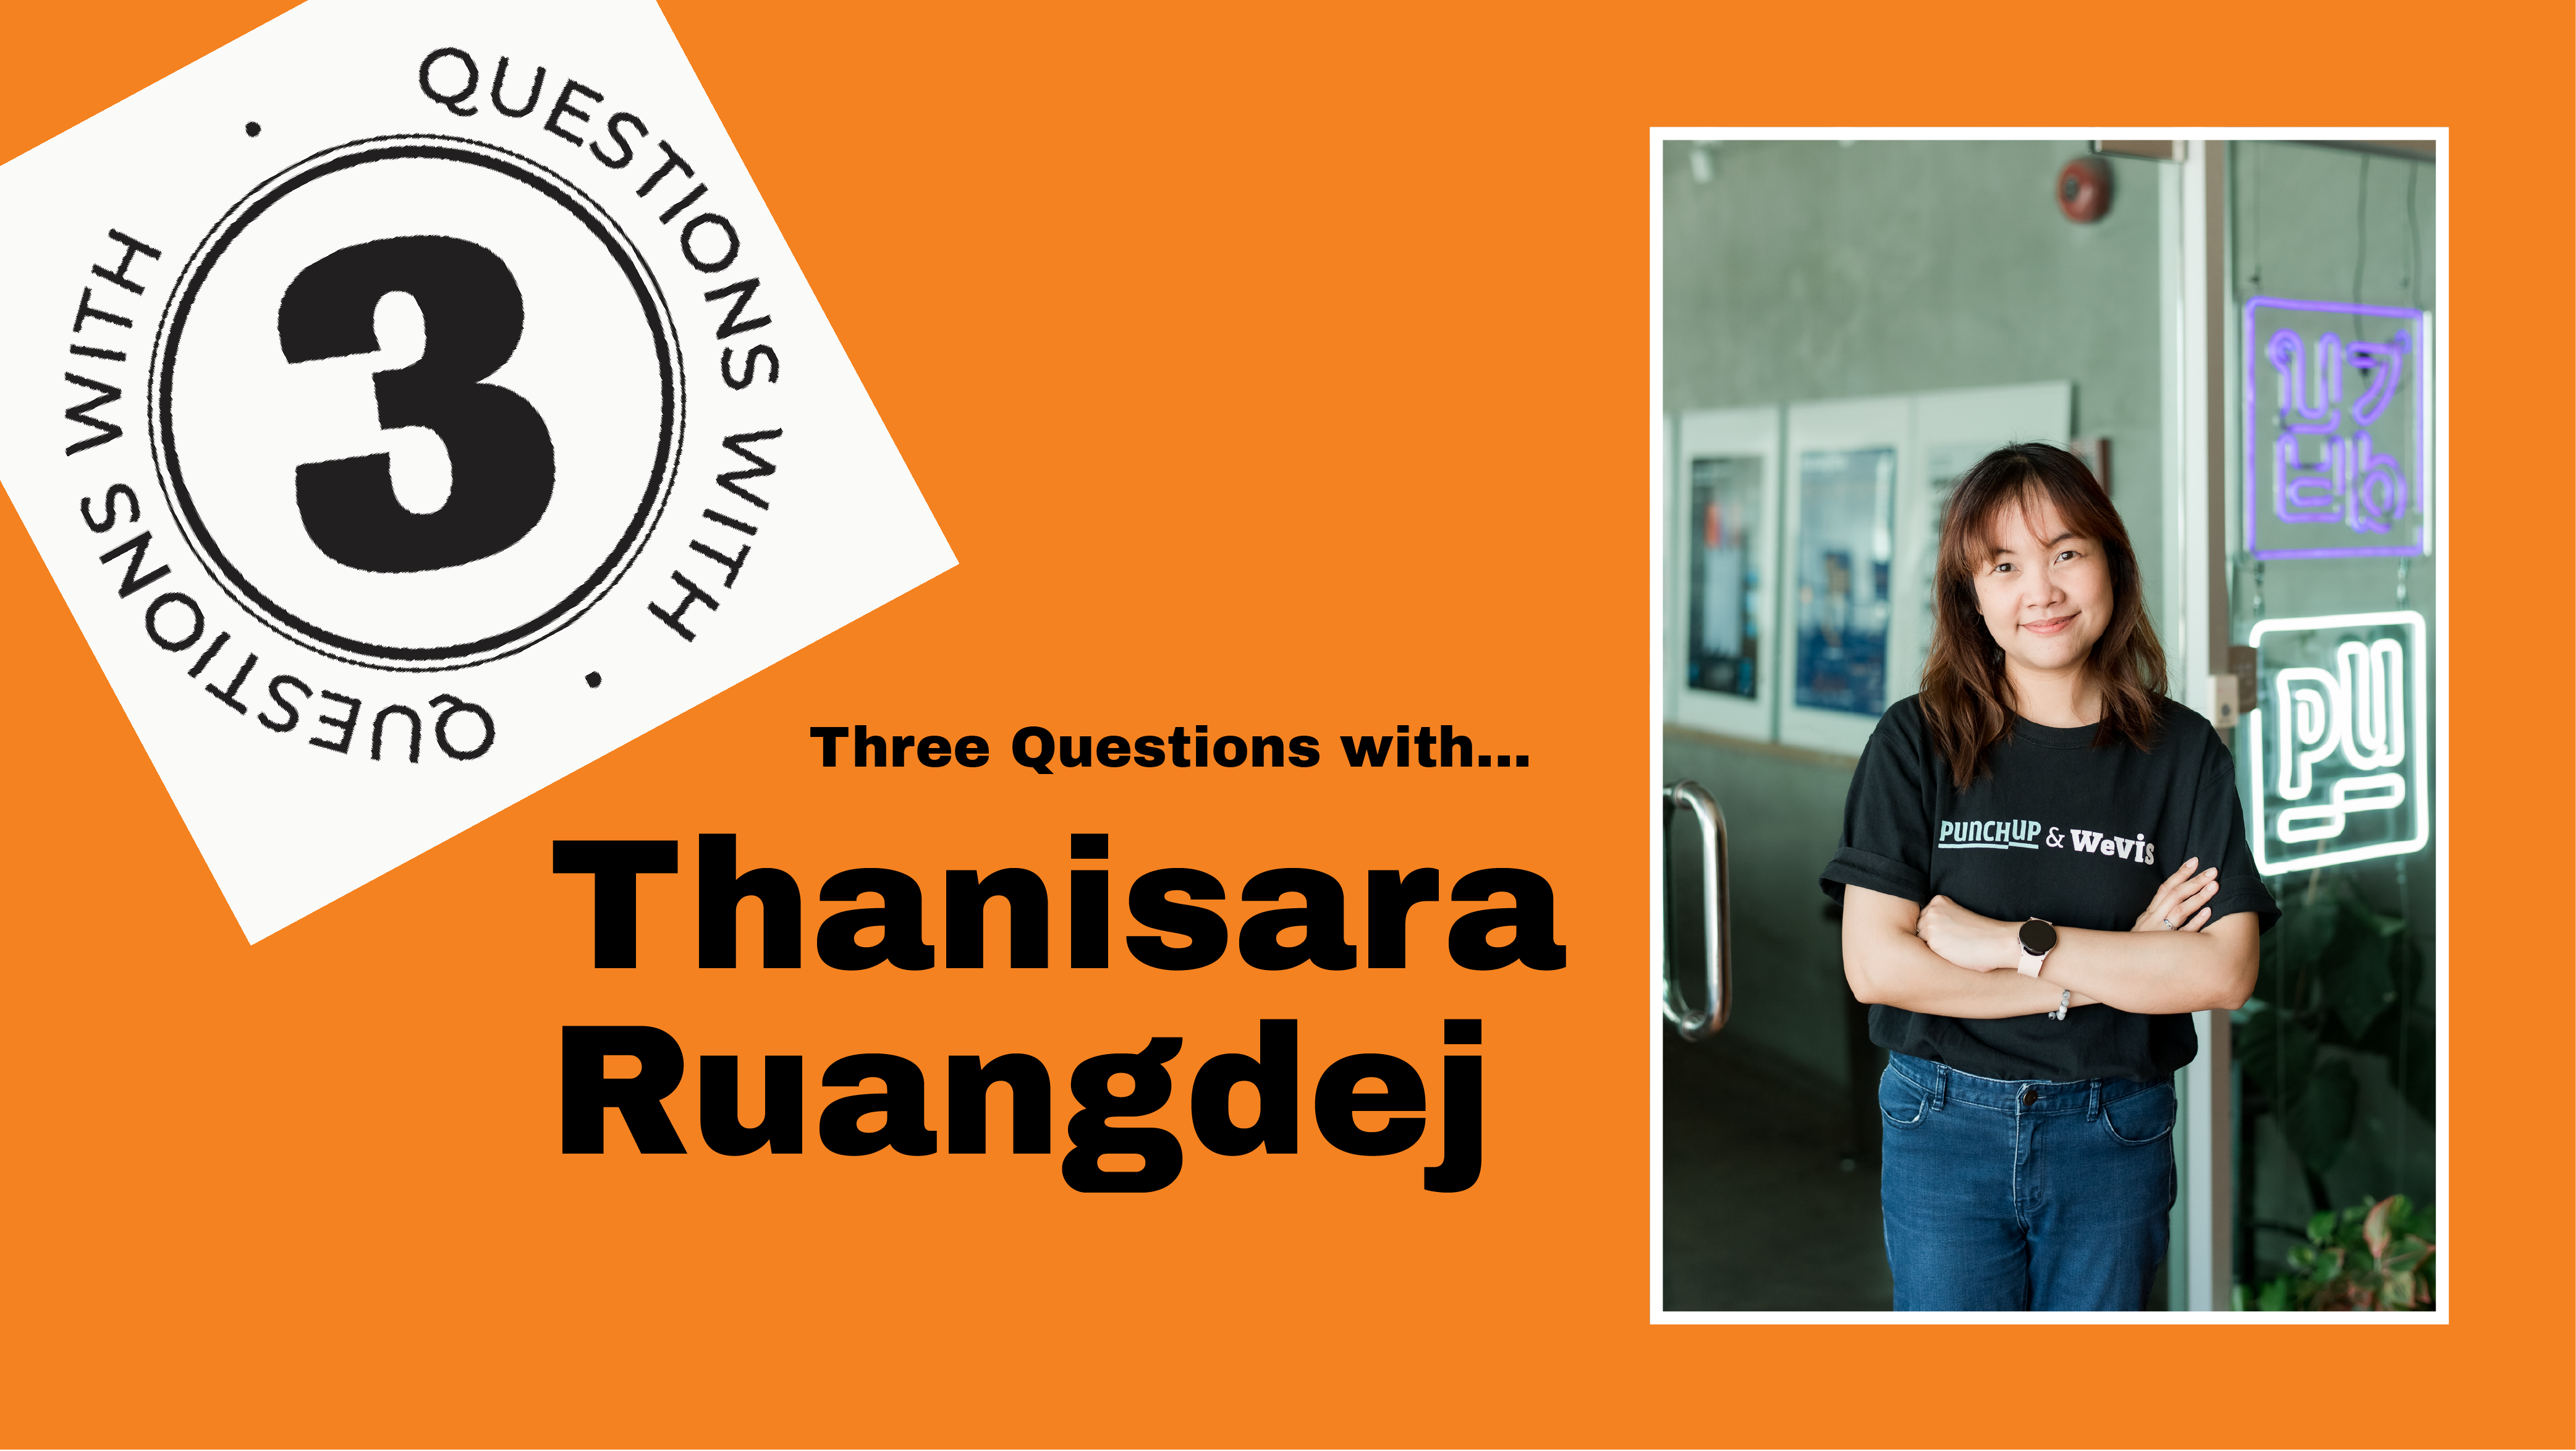 Cover image showing photo of Thanisara Ruangdej with text saying "Three Questions With..."